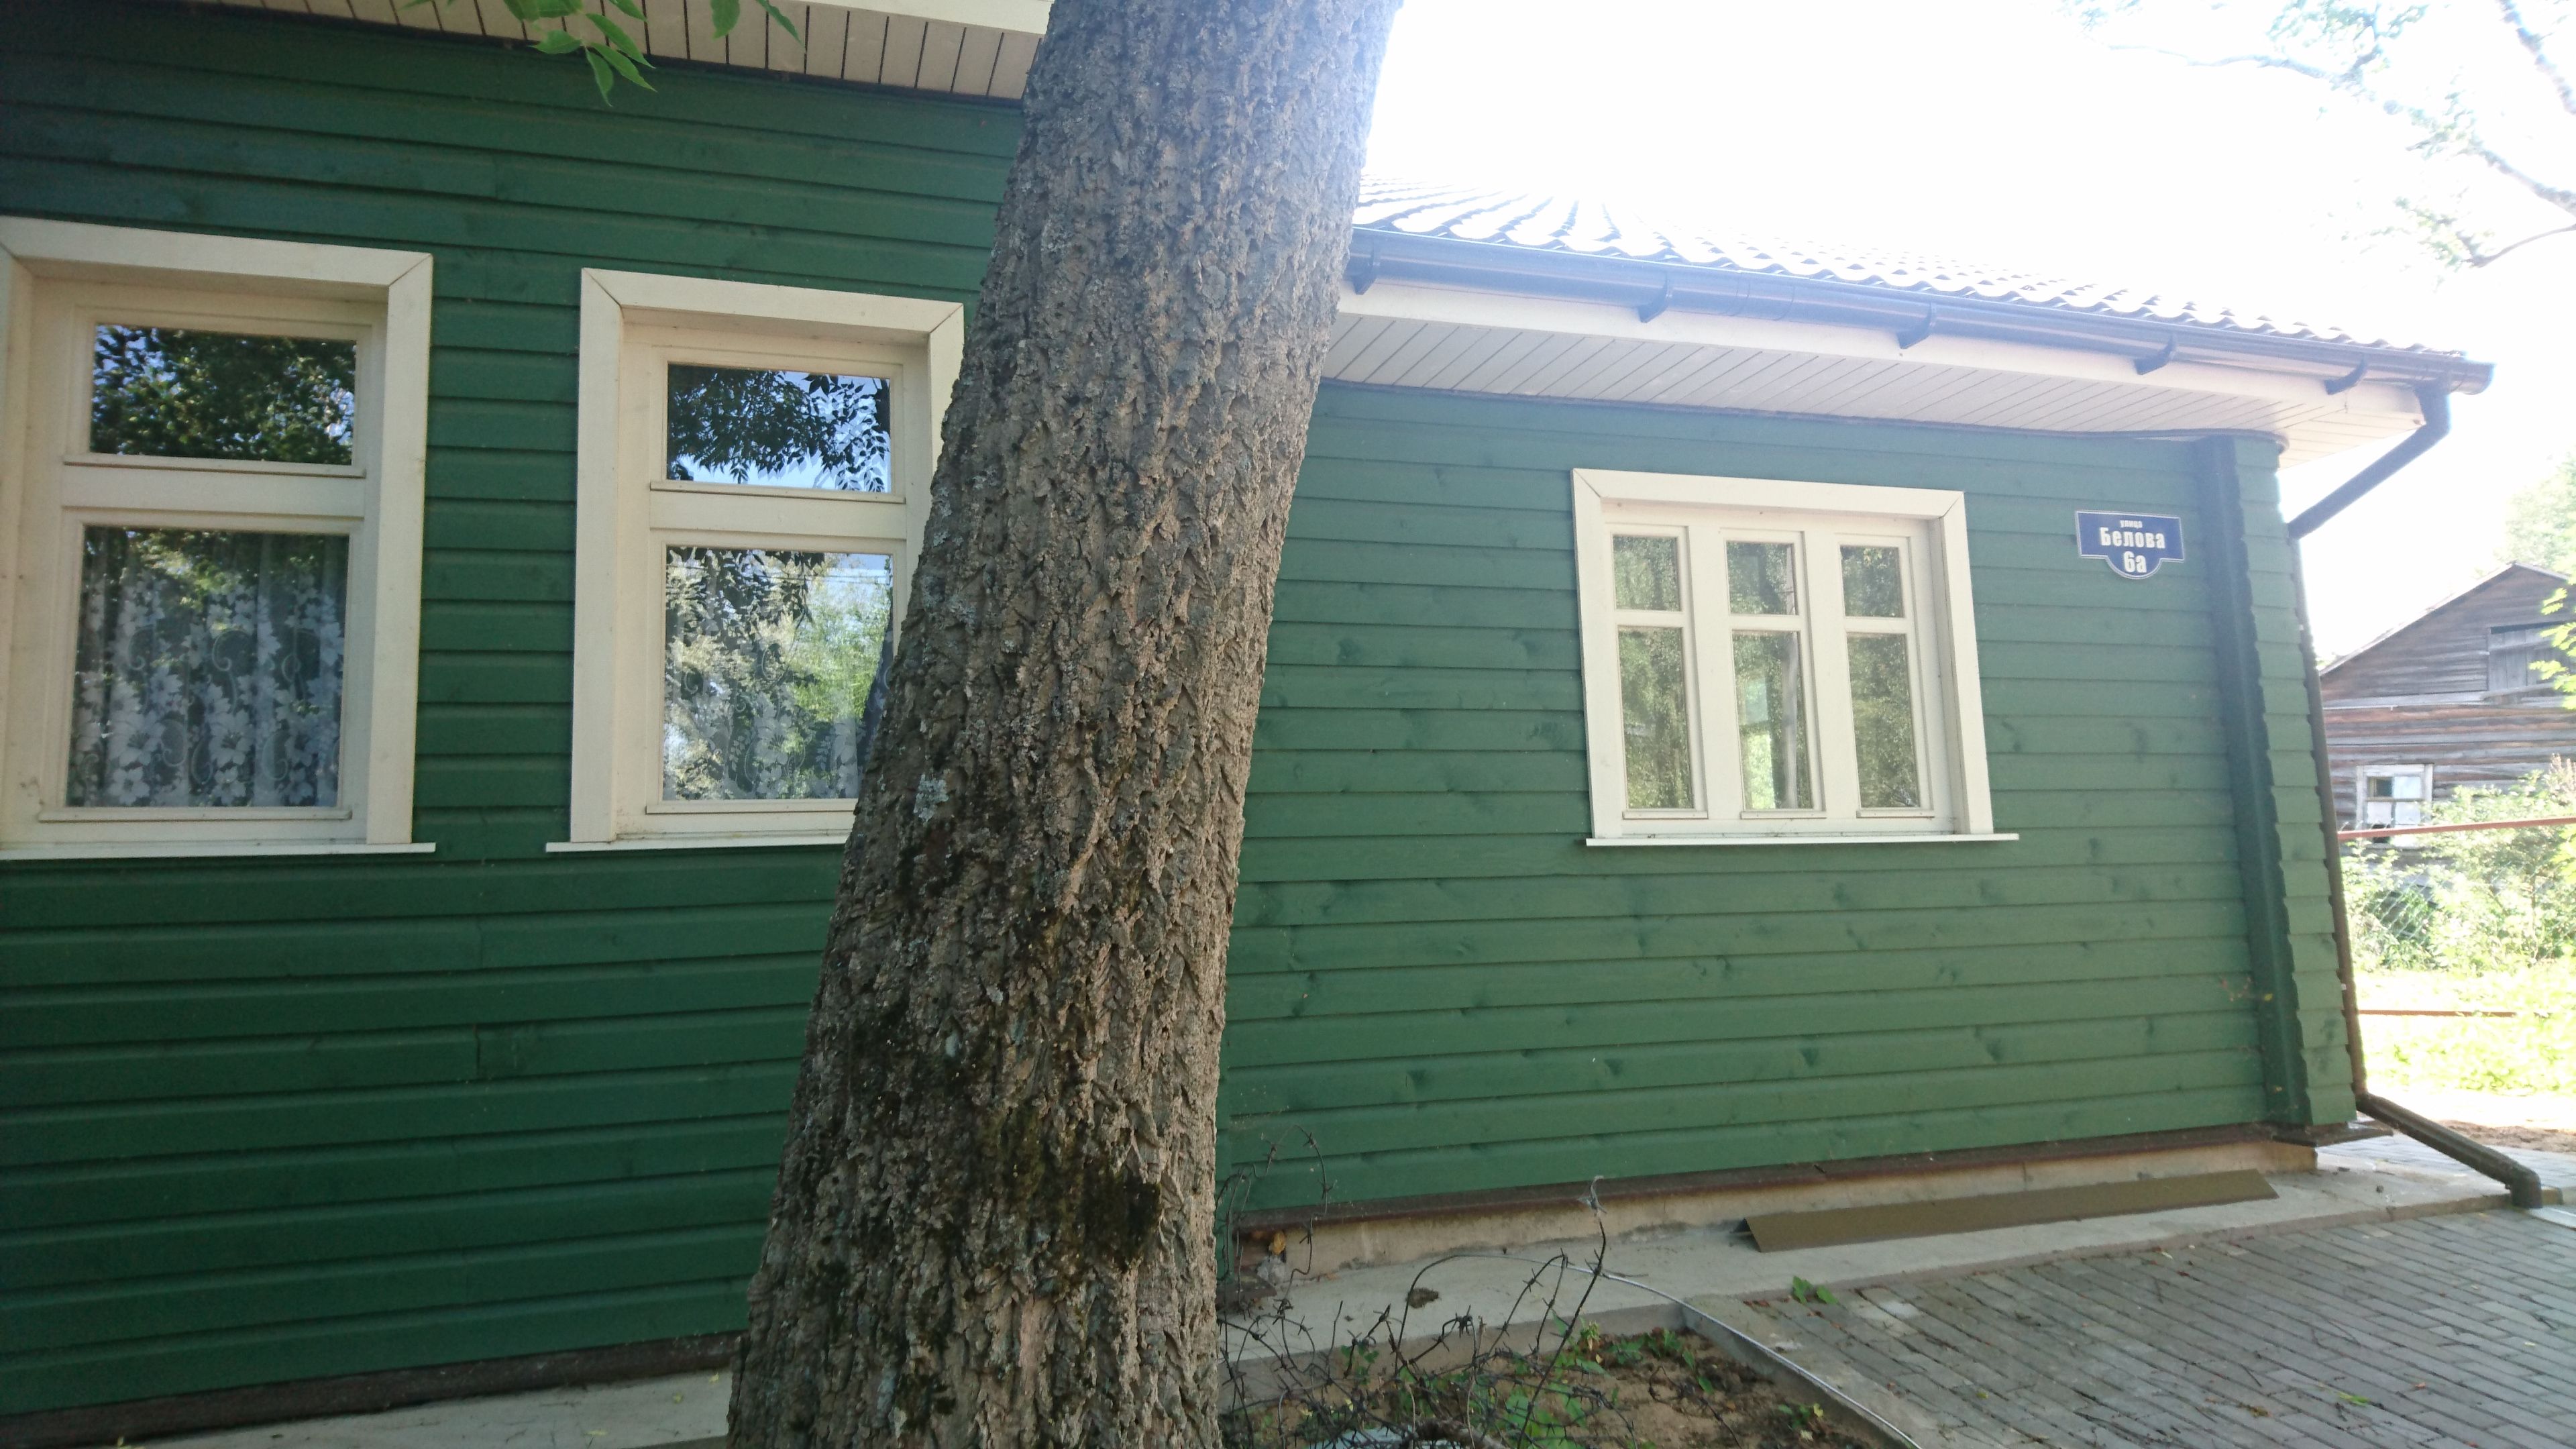 Ždanoka’s family house in Valdai, a favourite place for holidaymakers. Before and after the renovation, which, as we can see from the emails, was paid for by the MEP.